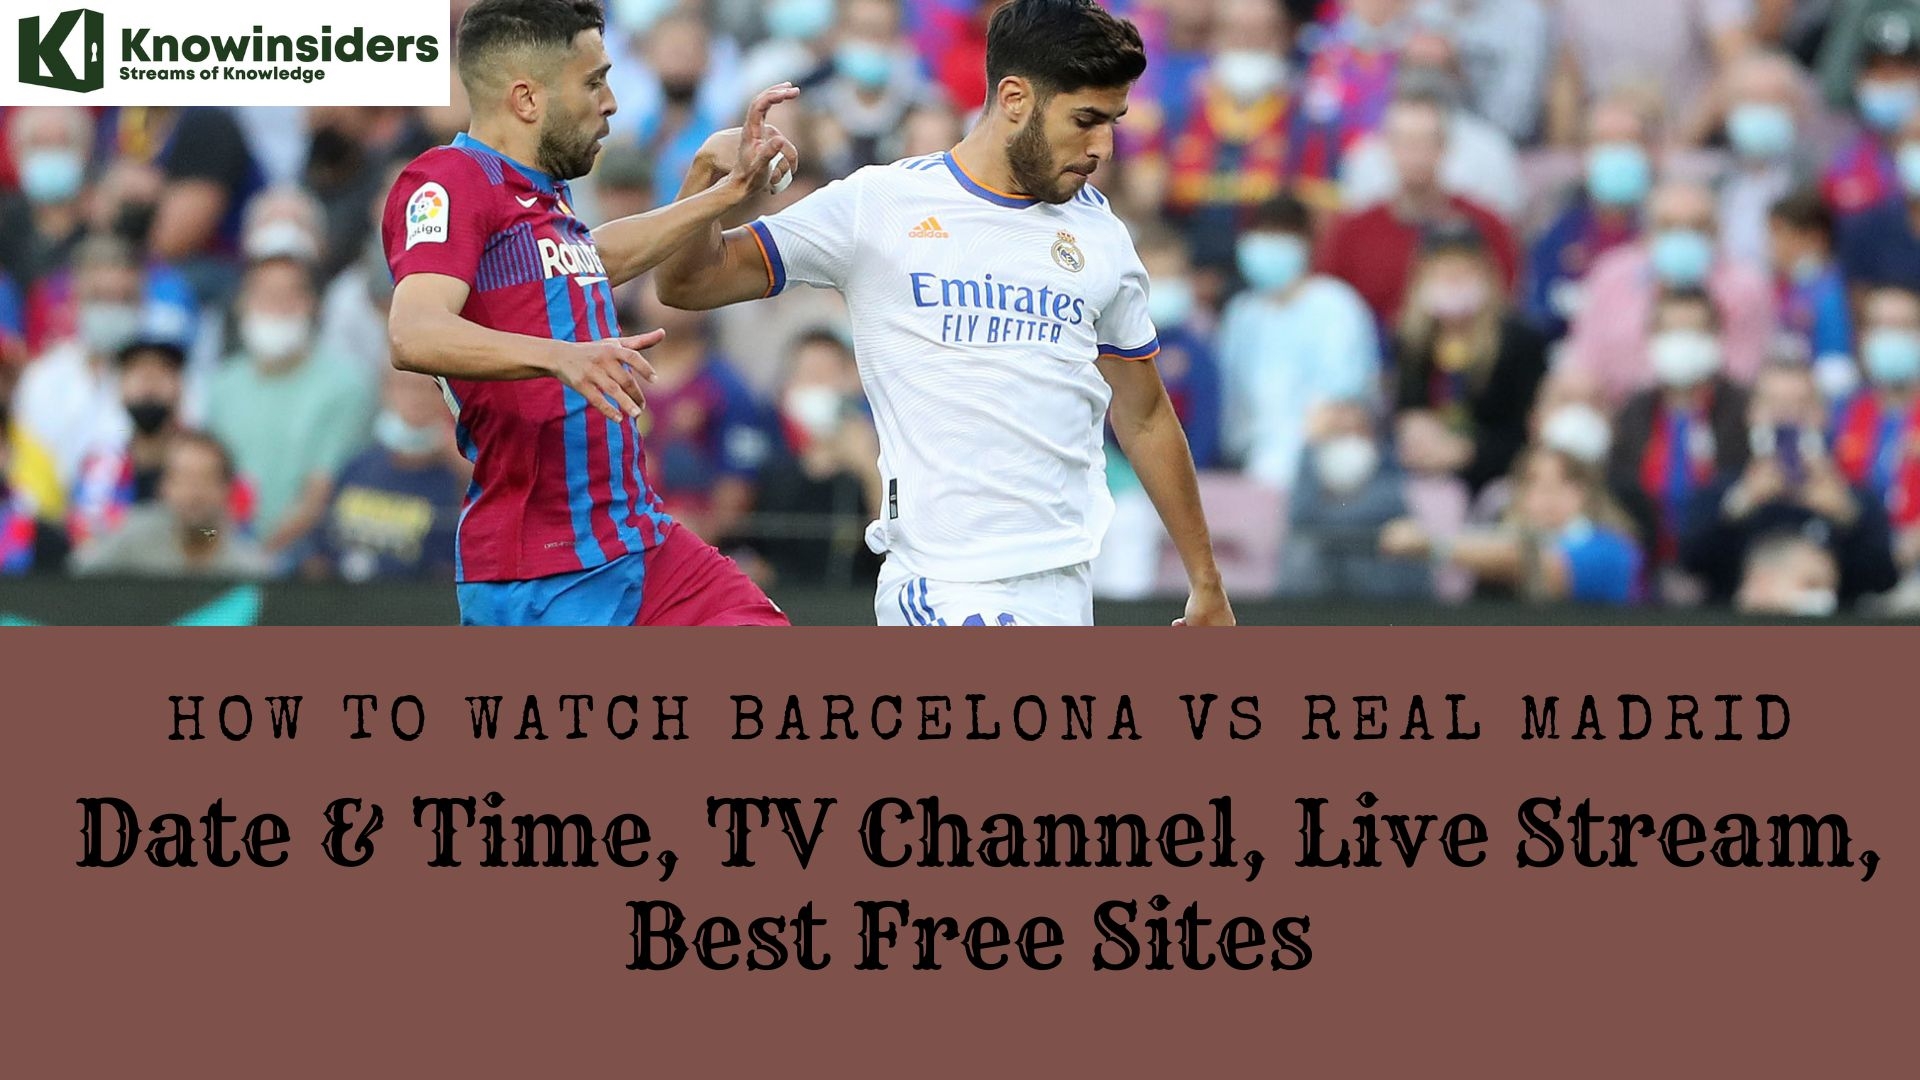 How To Watch Barcelona vs Real Madrid: Date & Time, TV Channel, Live Stream, Best Free Sites  Knowinsiders.com